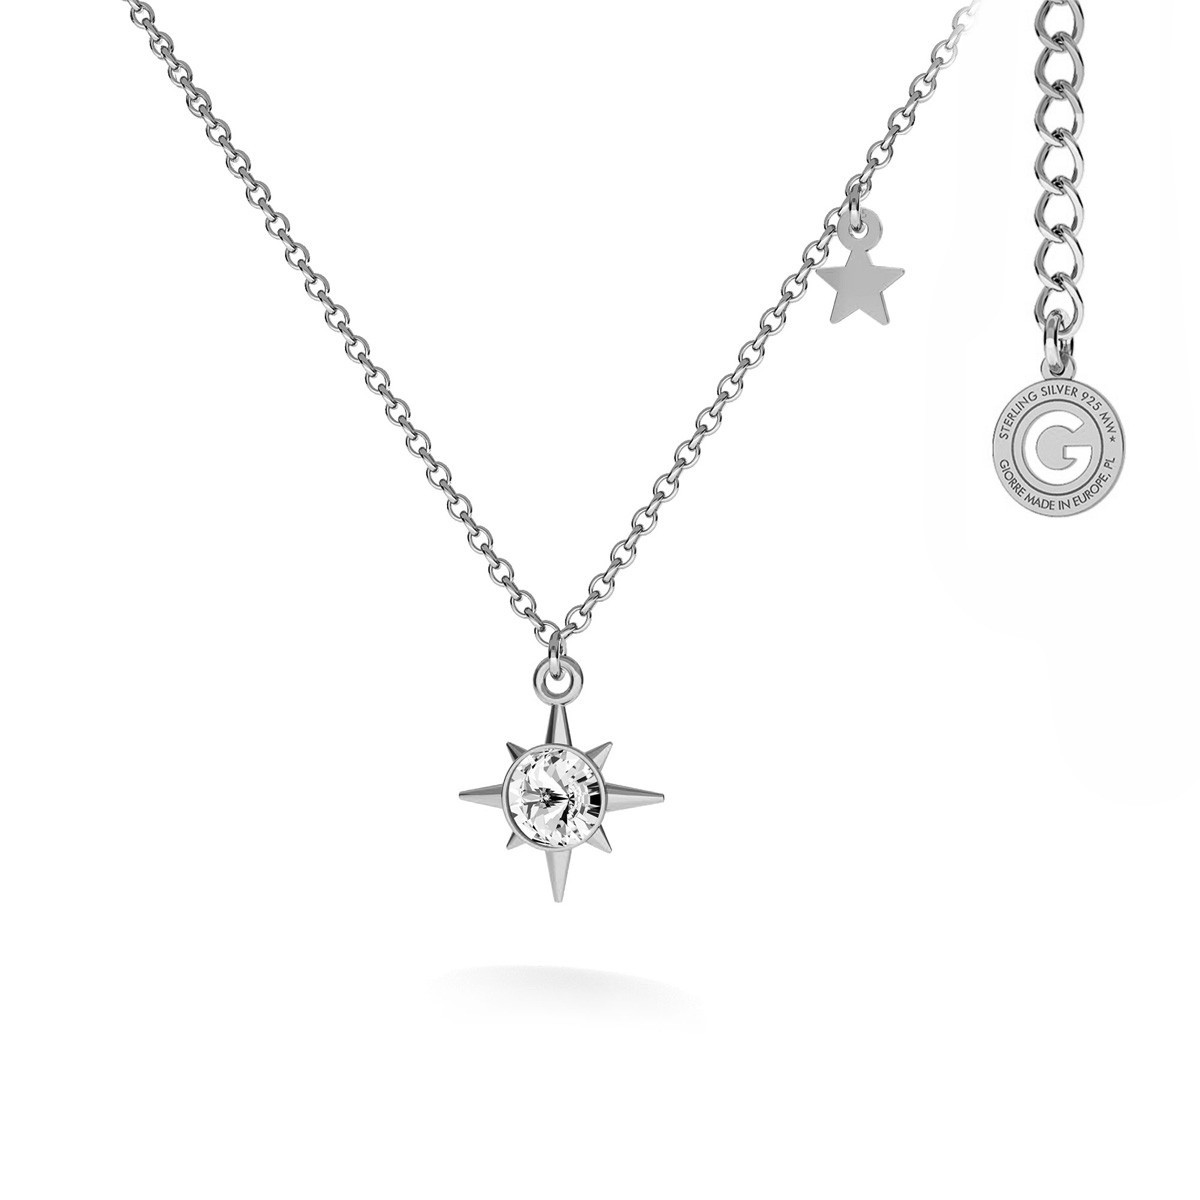 T°ra'vel'' Necklace - your name, sterling silver 925